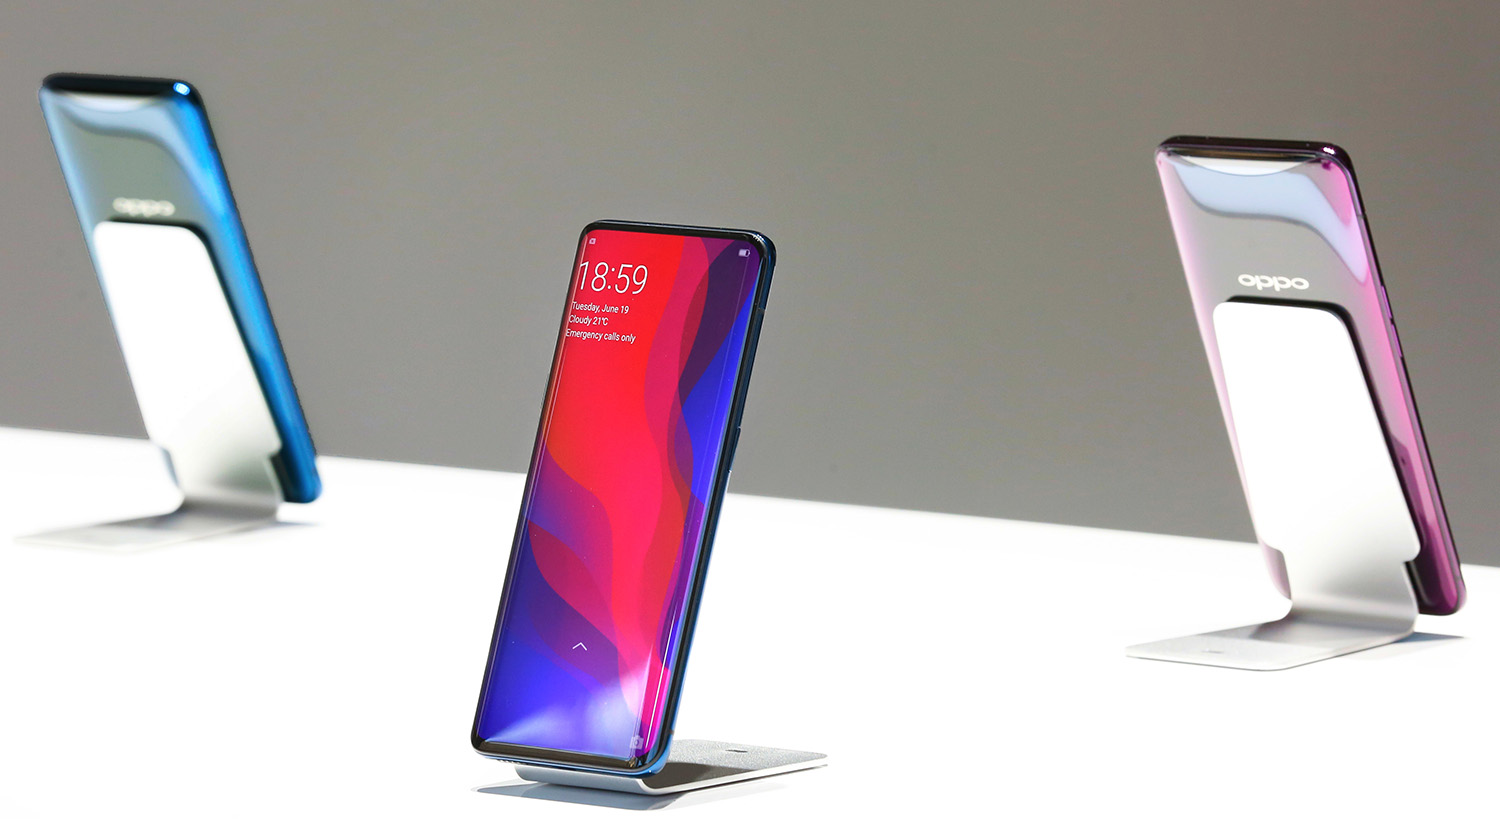  Oppo finds its new flagship in the Find X